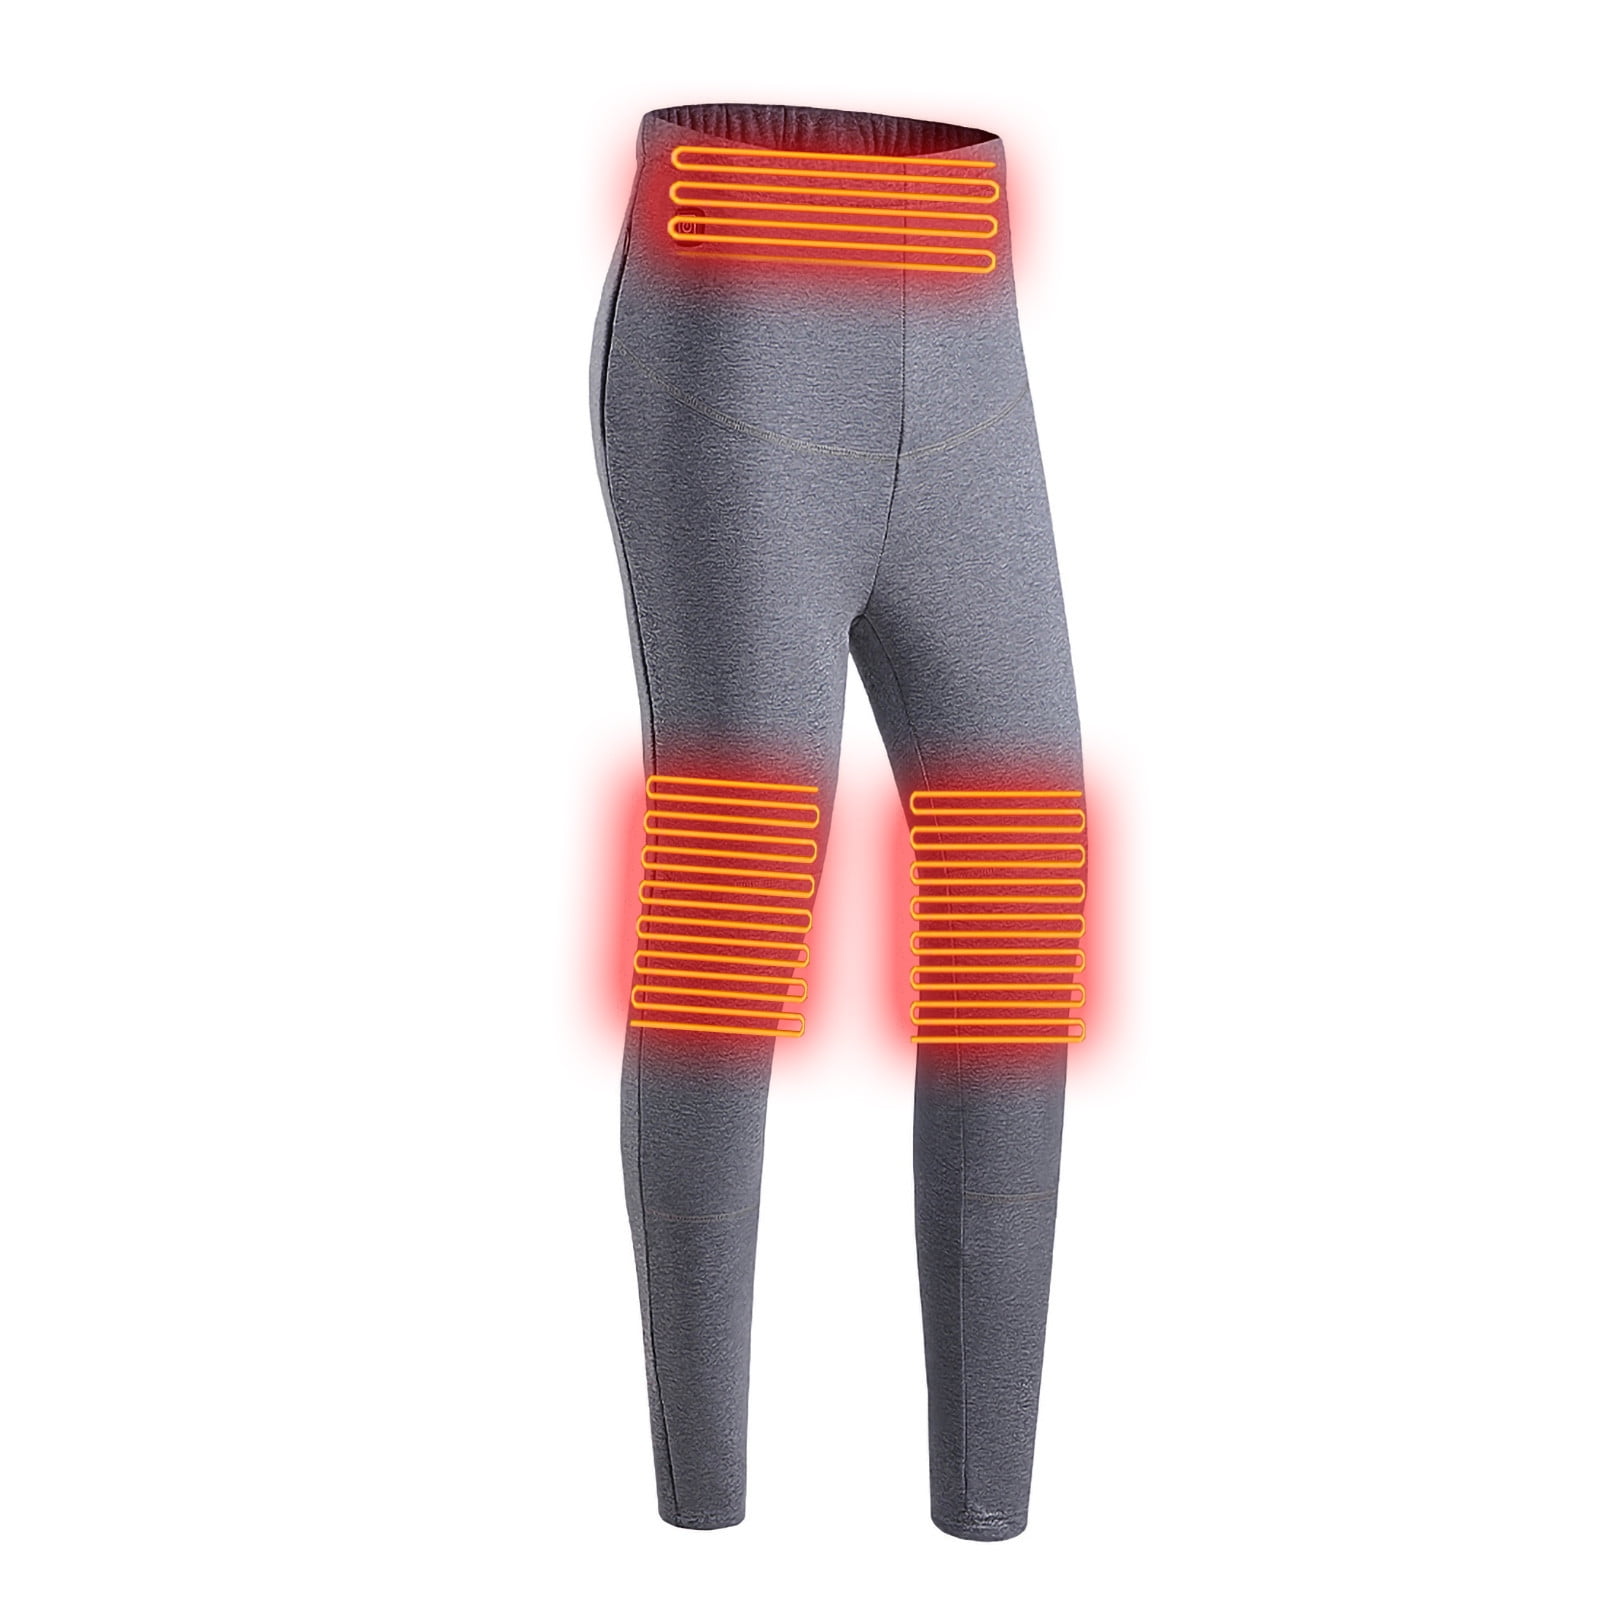 Heated Pants, Thermal Underwear for Women, Electric USB Heating